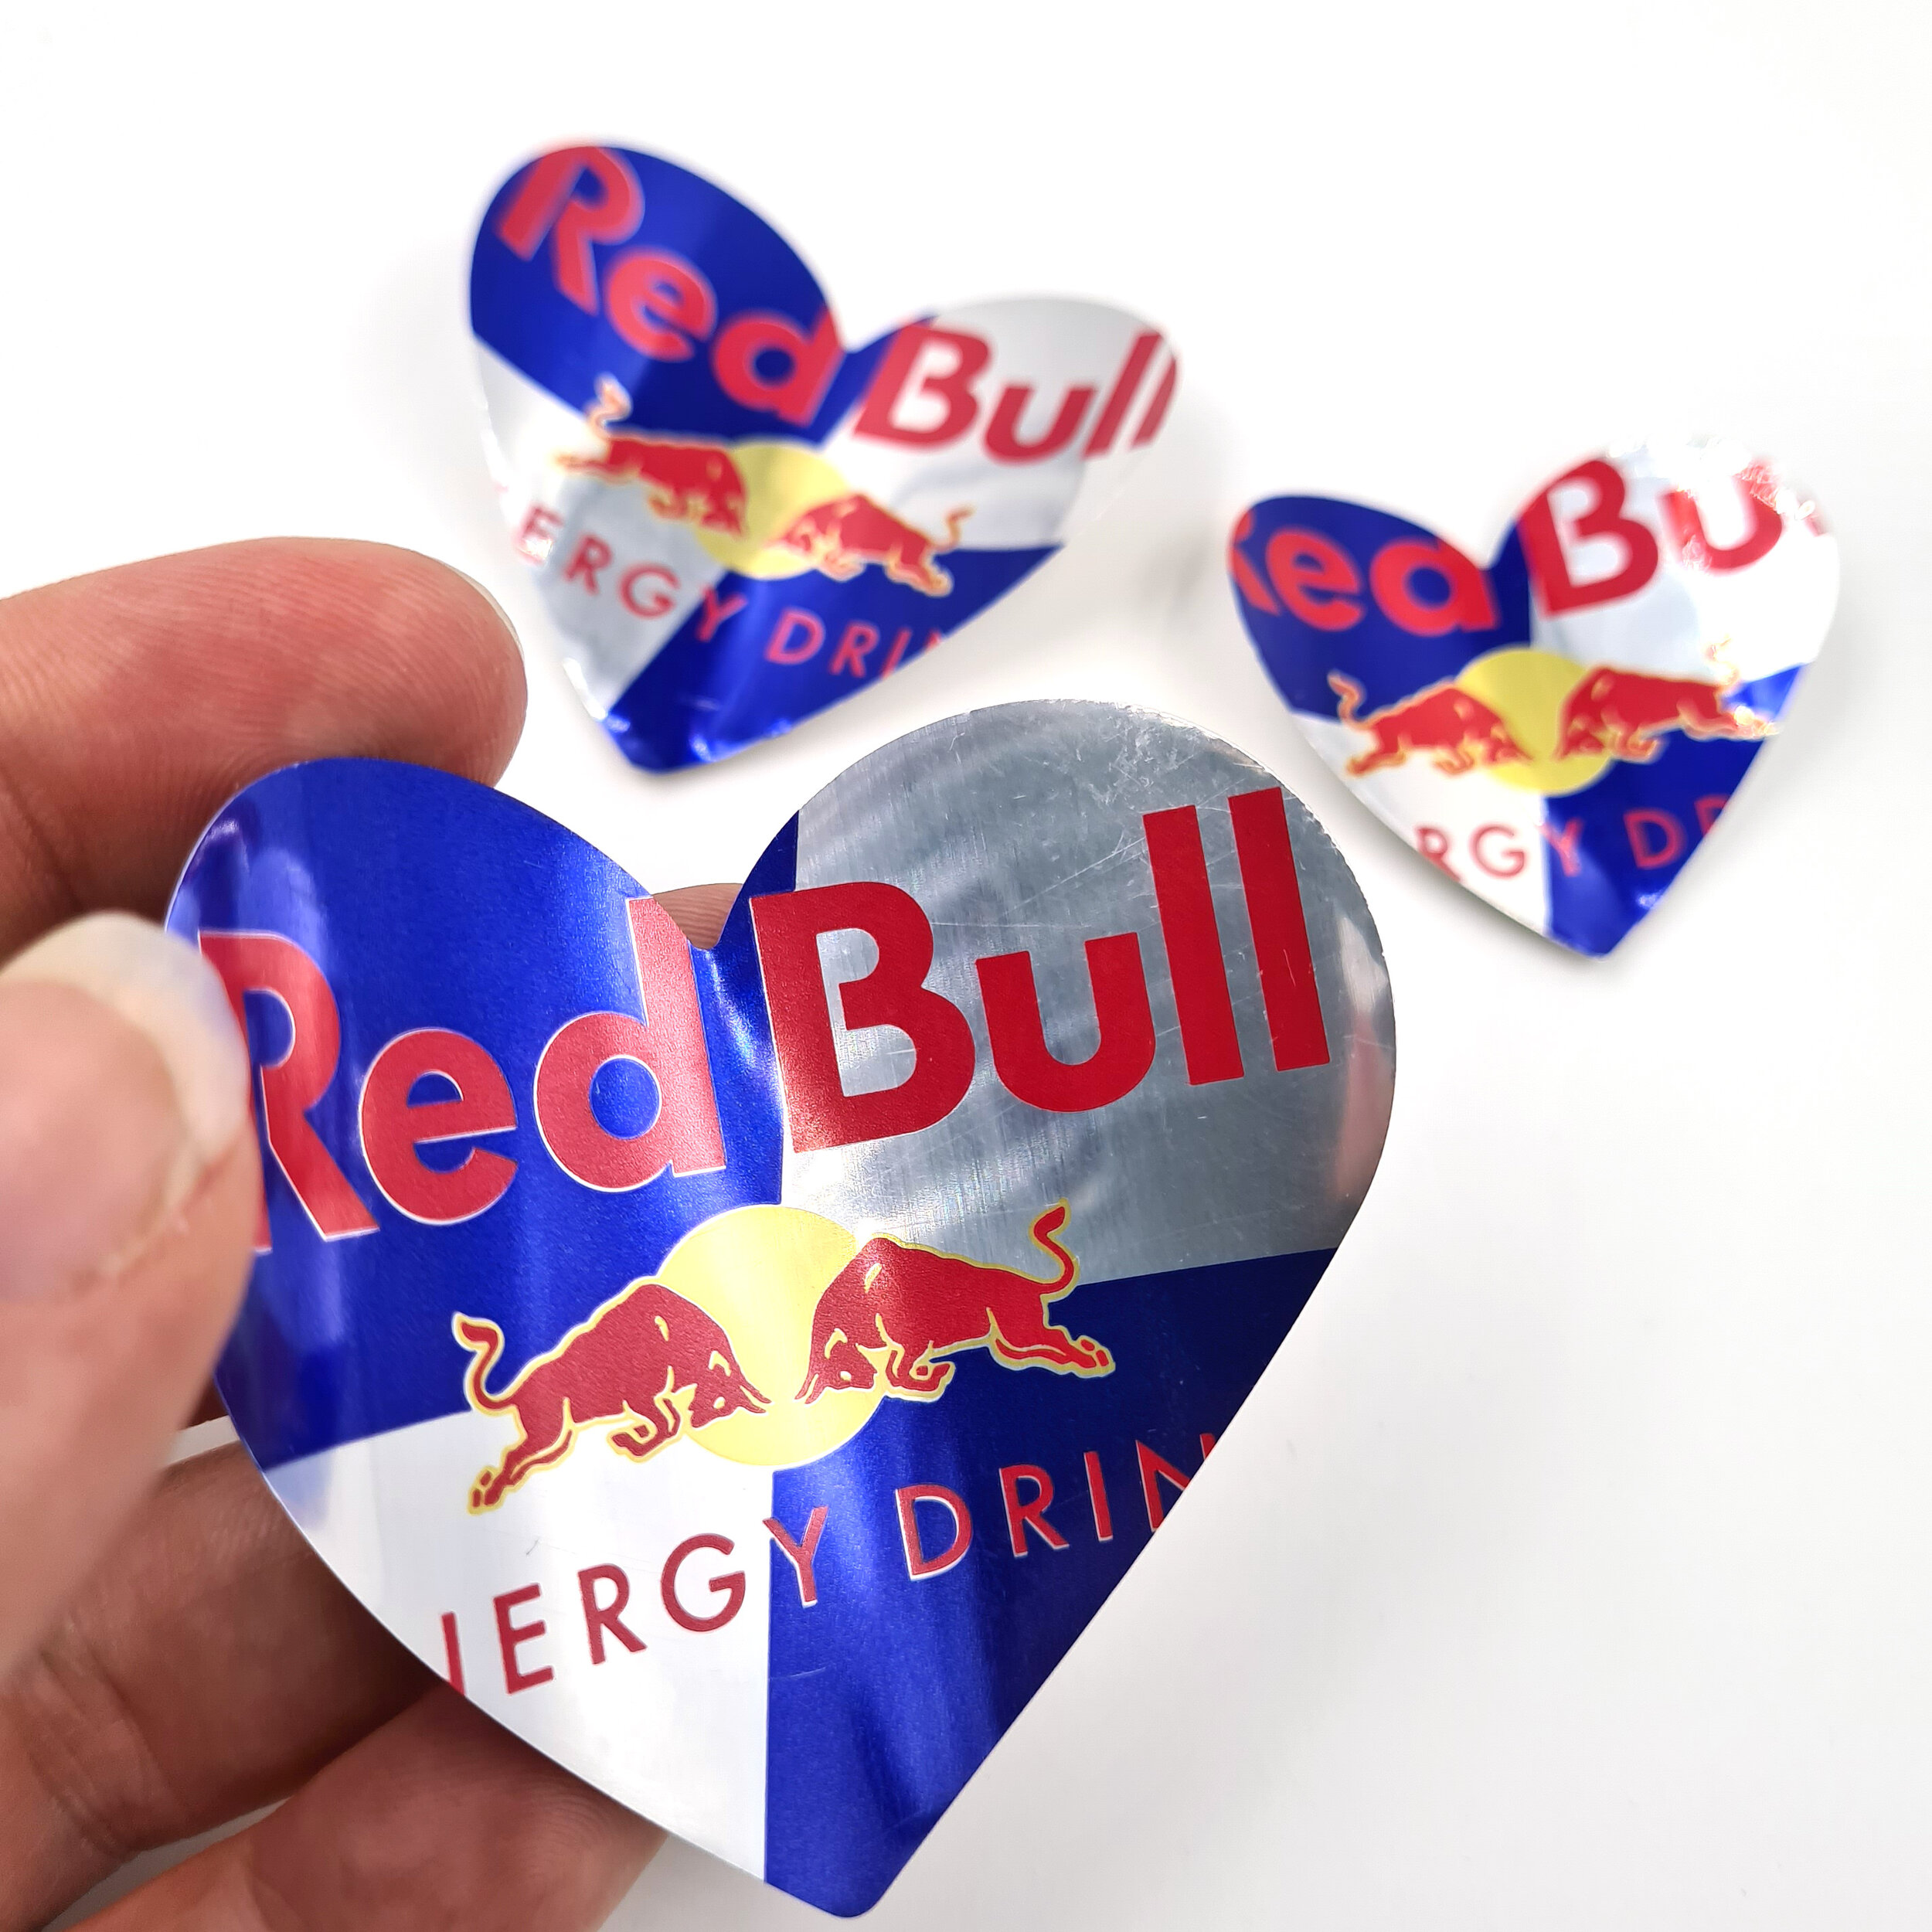 Redbull blue red and silver Heart Can Magnets hand 